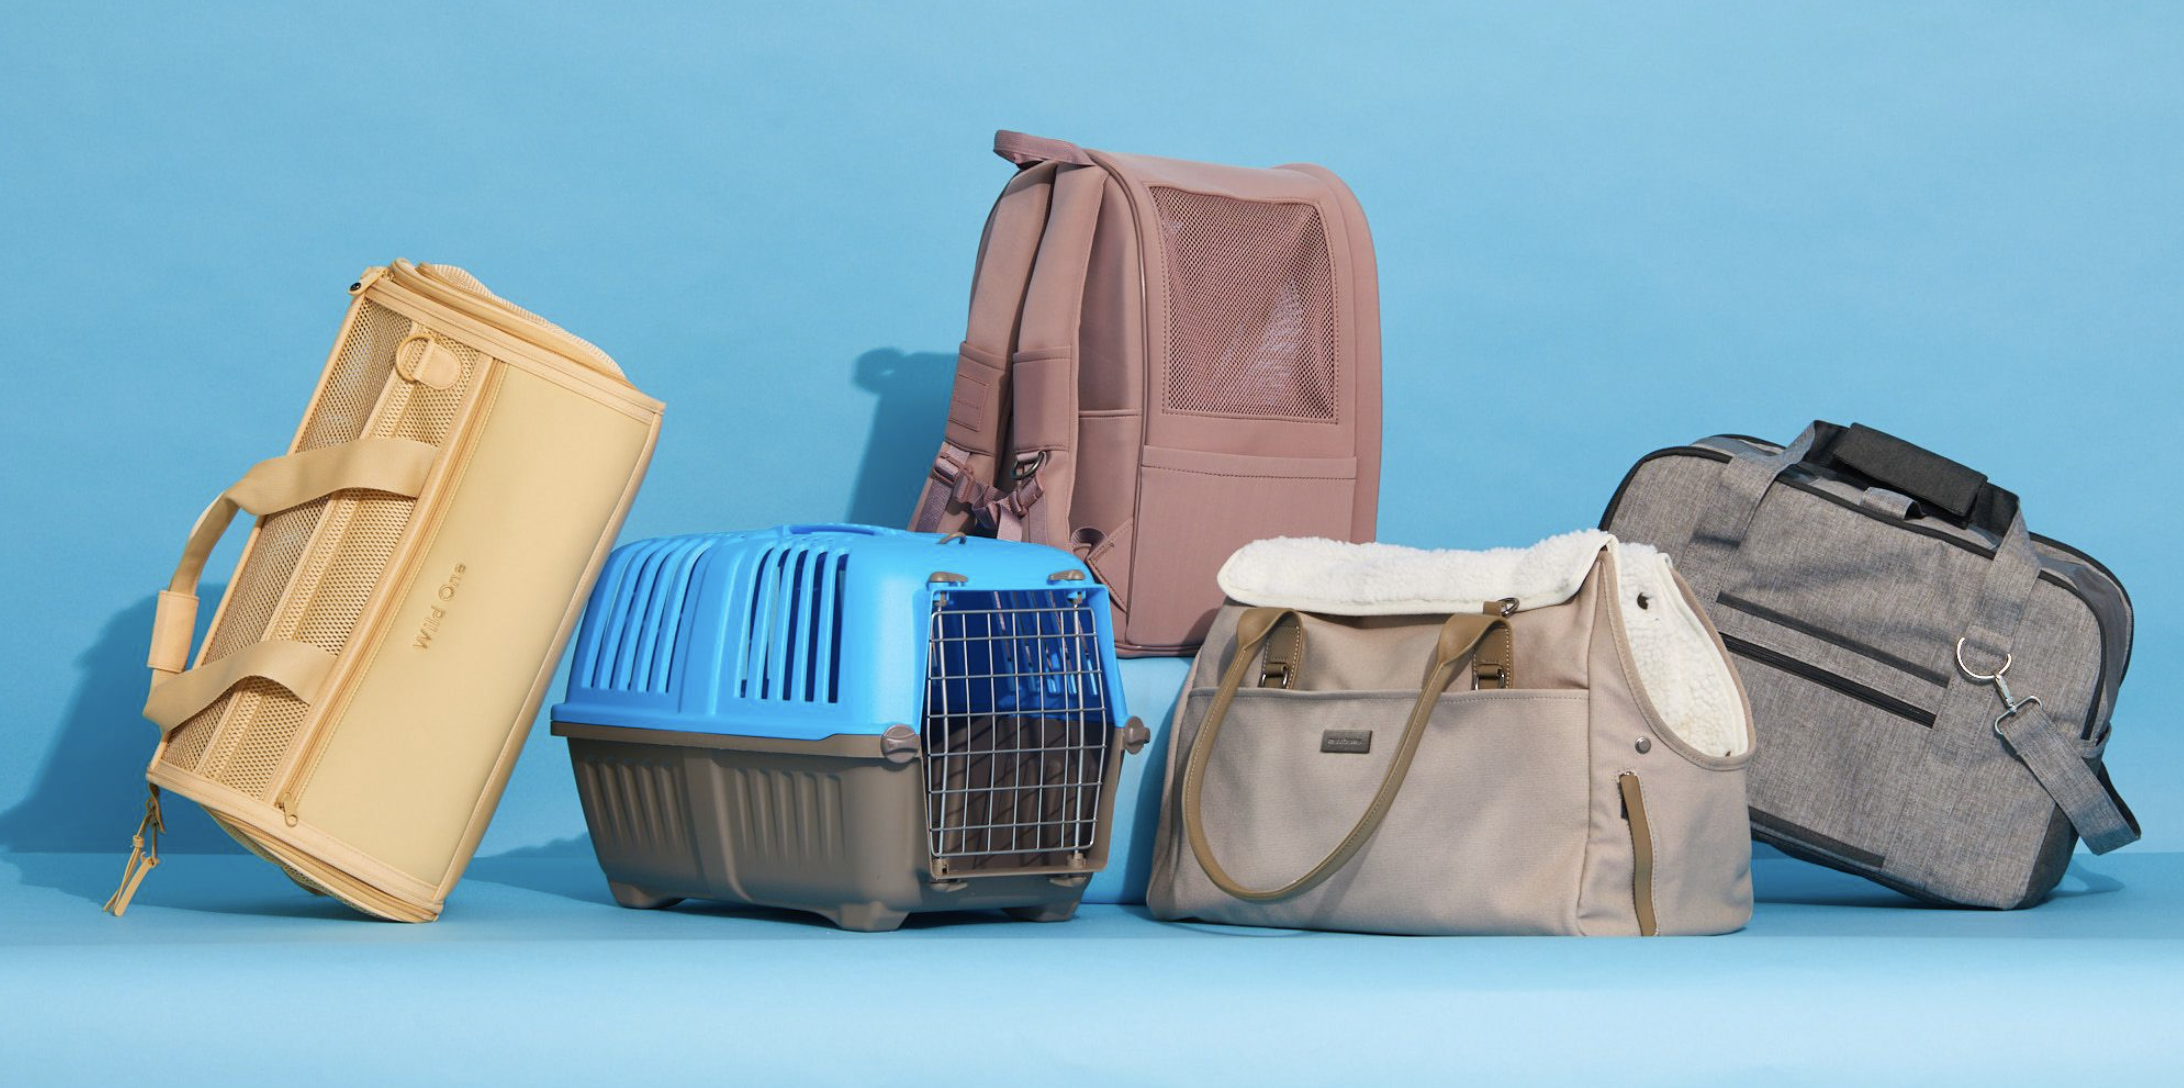 Best dog carriers for travel 2023, according to experts